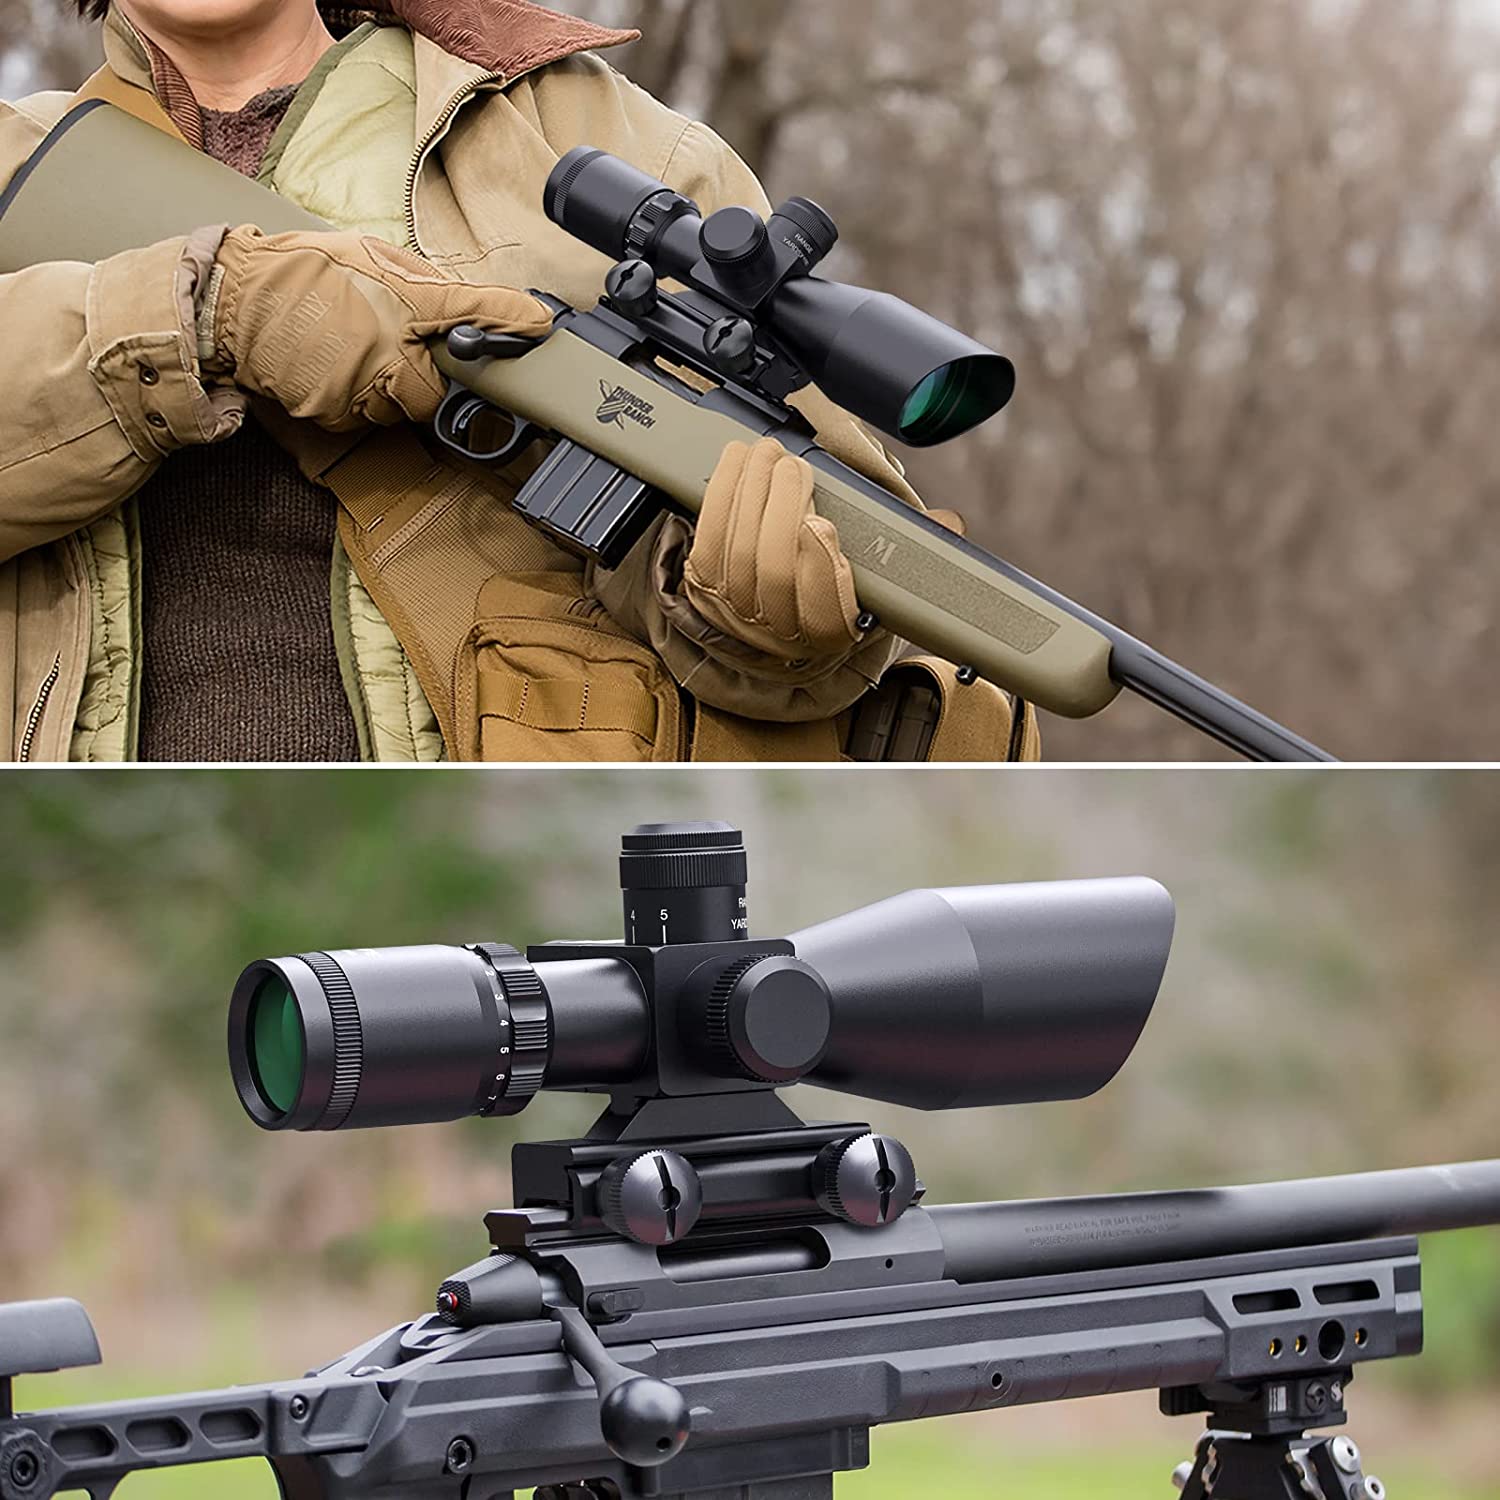 Review for CVLIFE 2.5-10x40e Red & Green Illuminated Scope with 20mm Mount